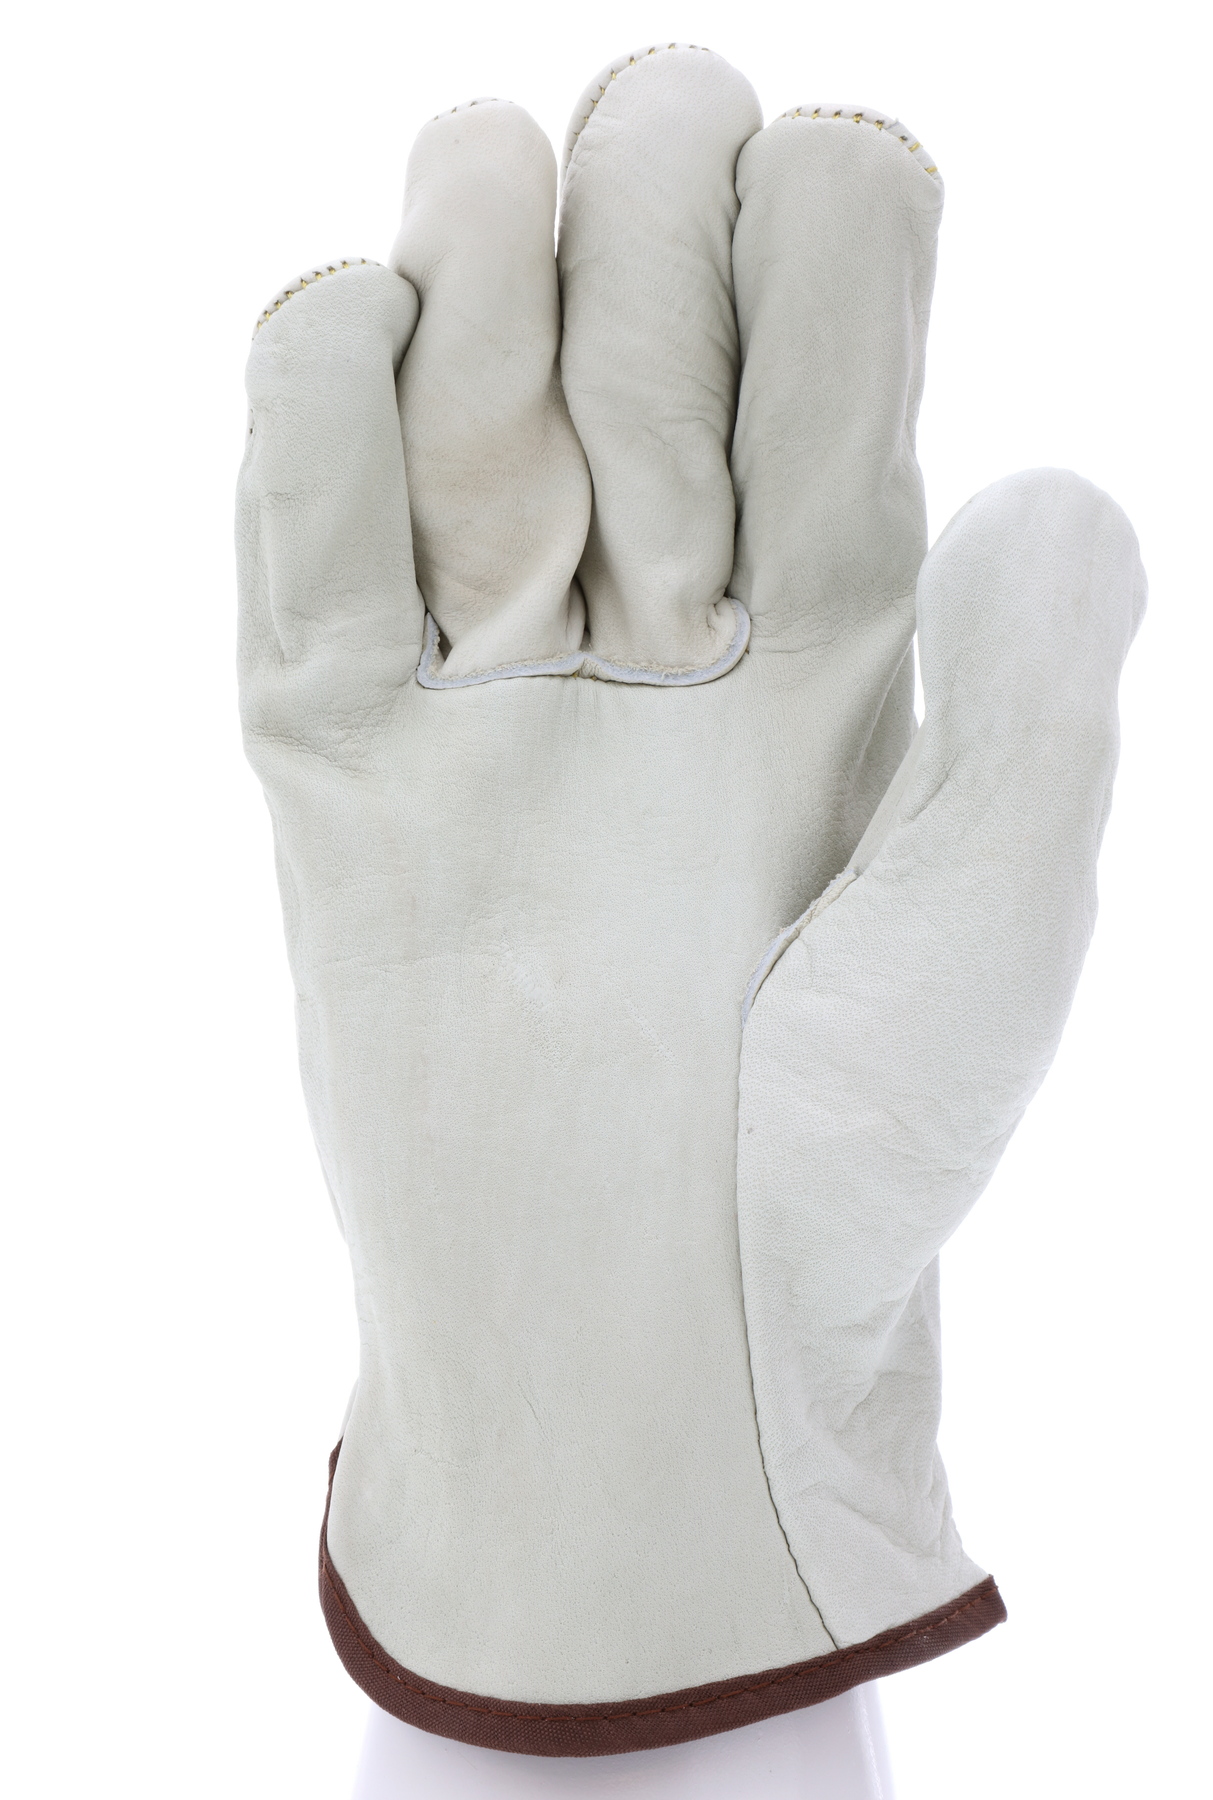 CV Grade Grain Unlined Cow Leather Drivers Gloves - Spill Control